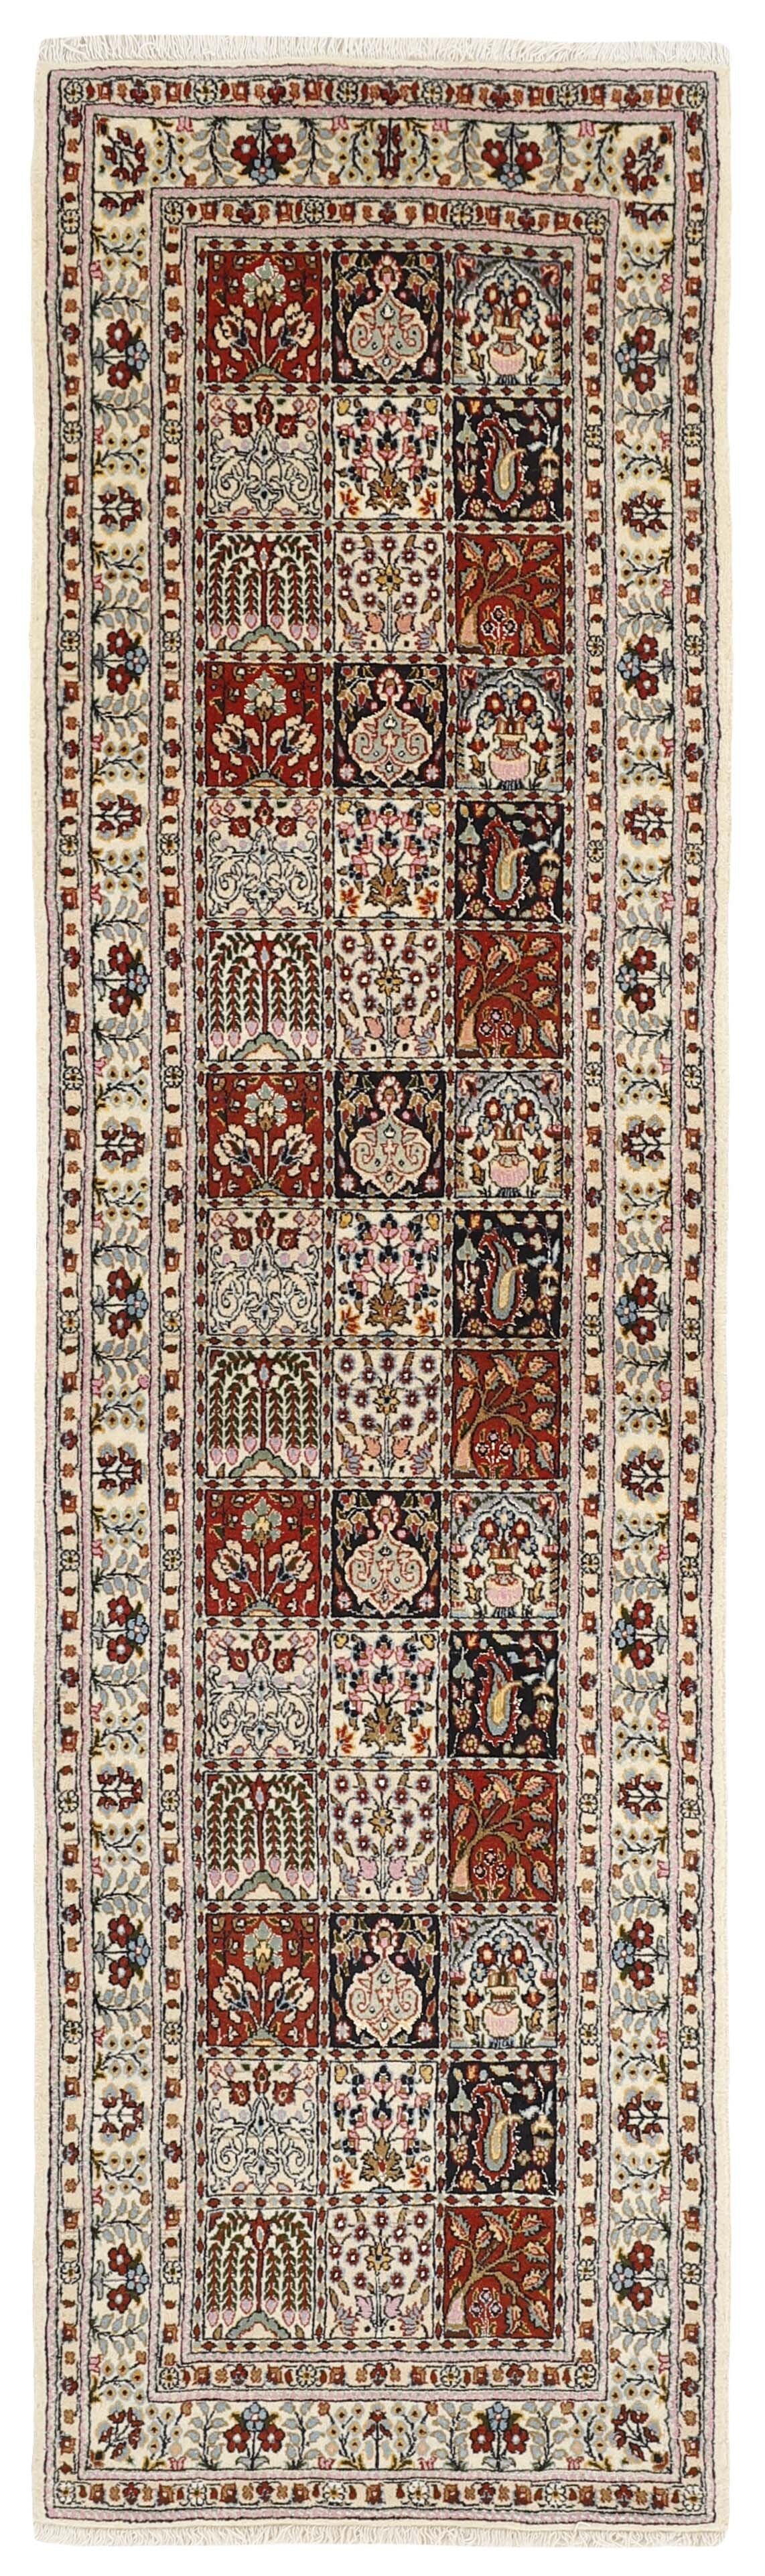 authentic persian runner with floral pattern in red, pink, yellow, blue, green, beige, brown and black